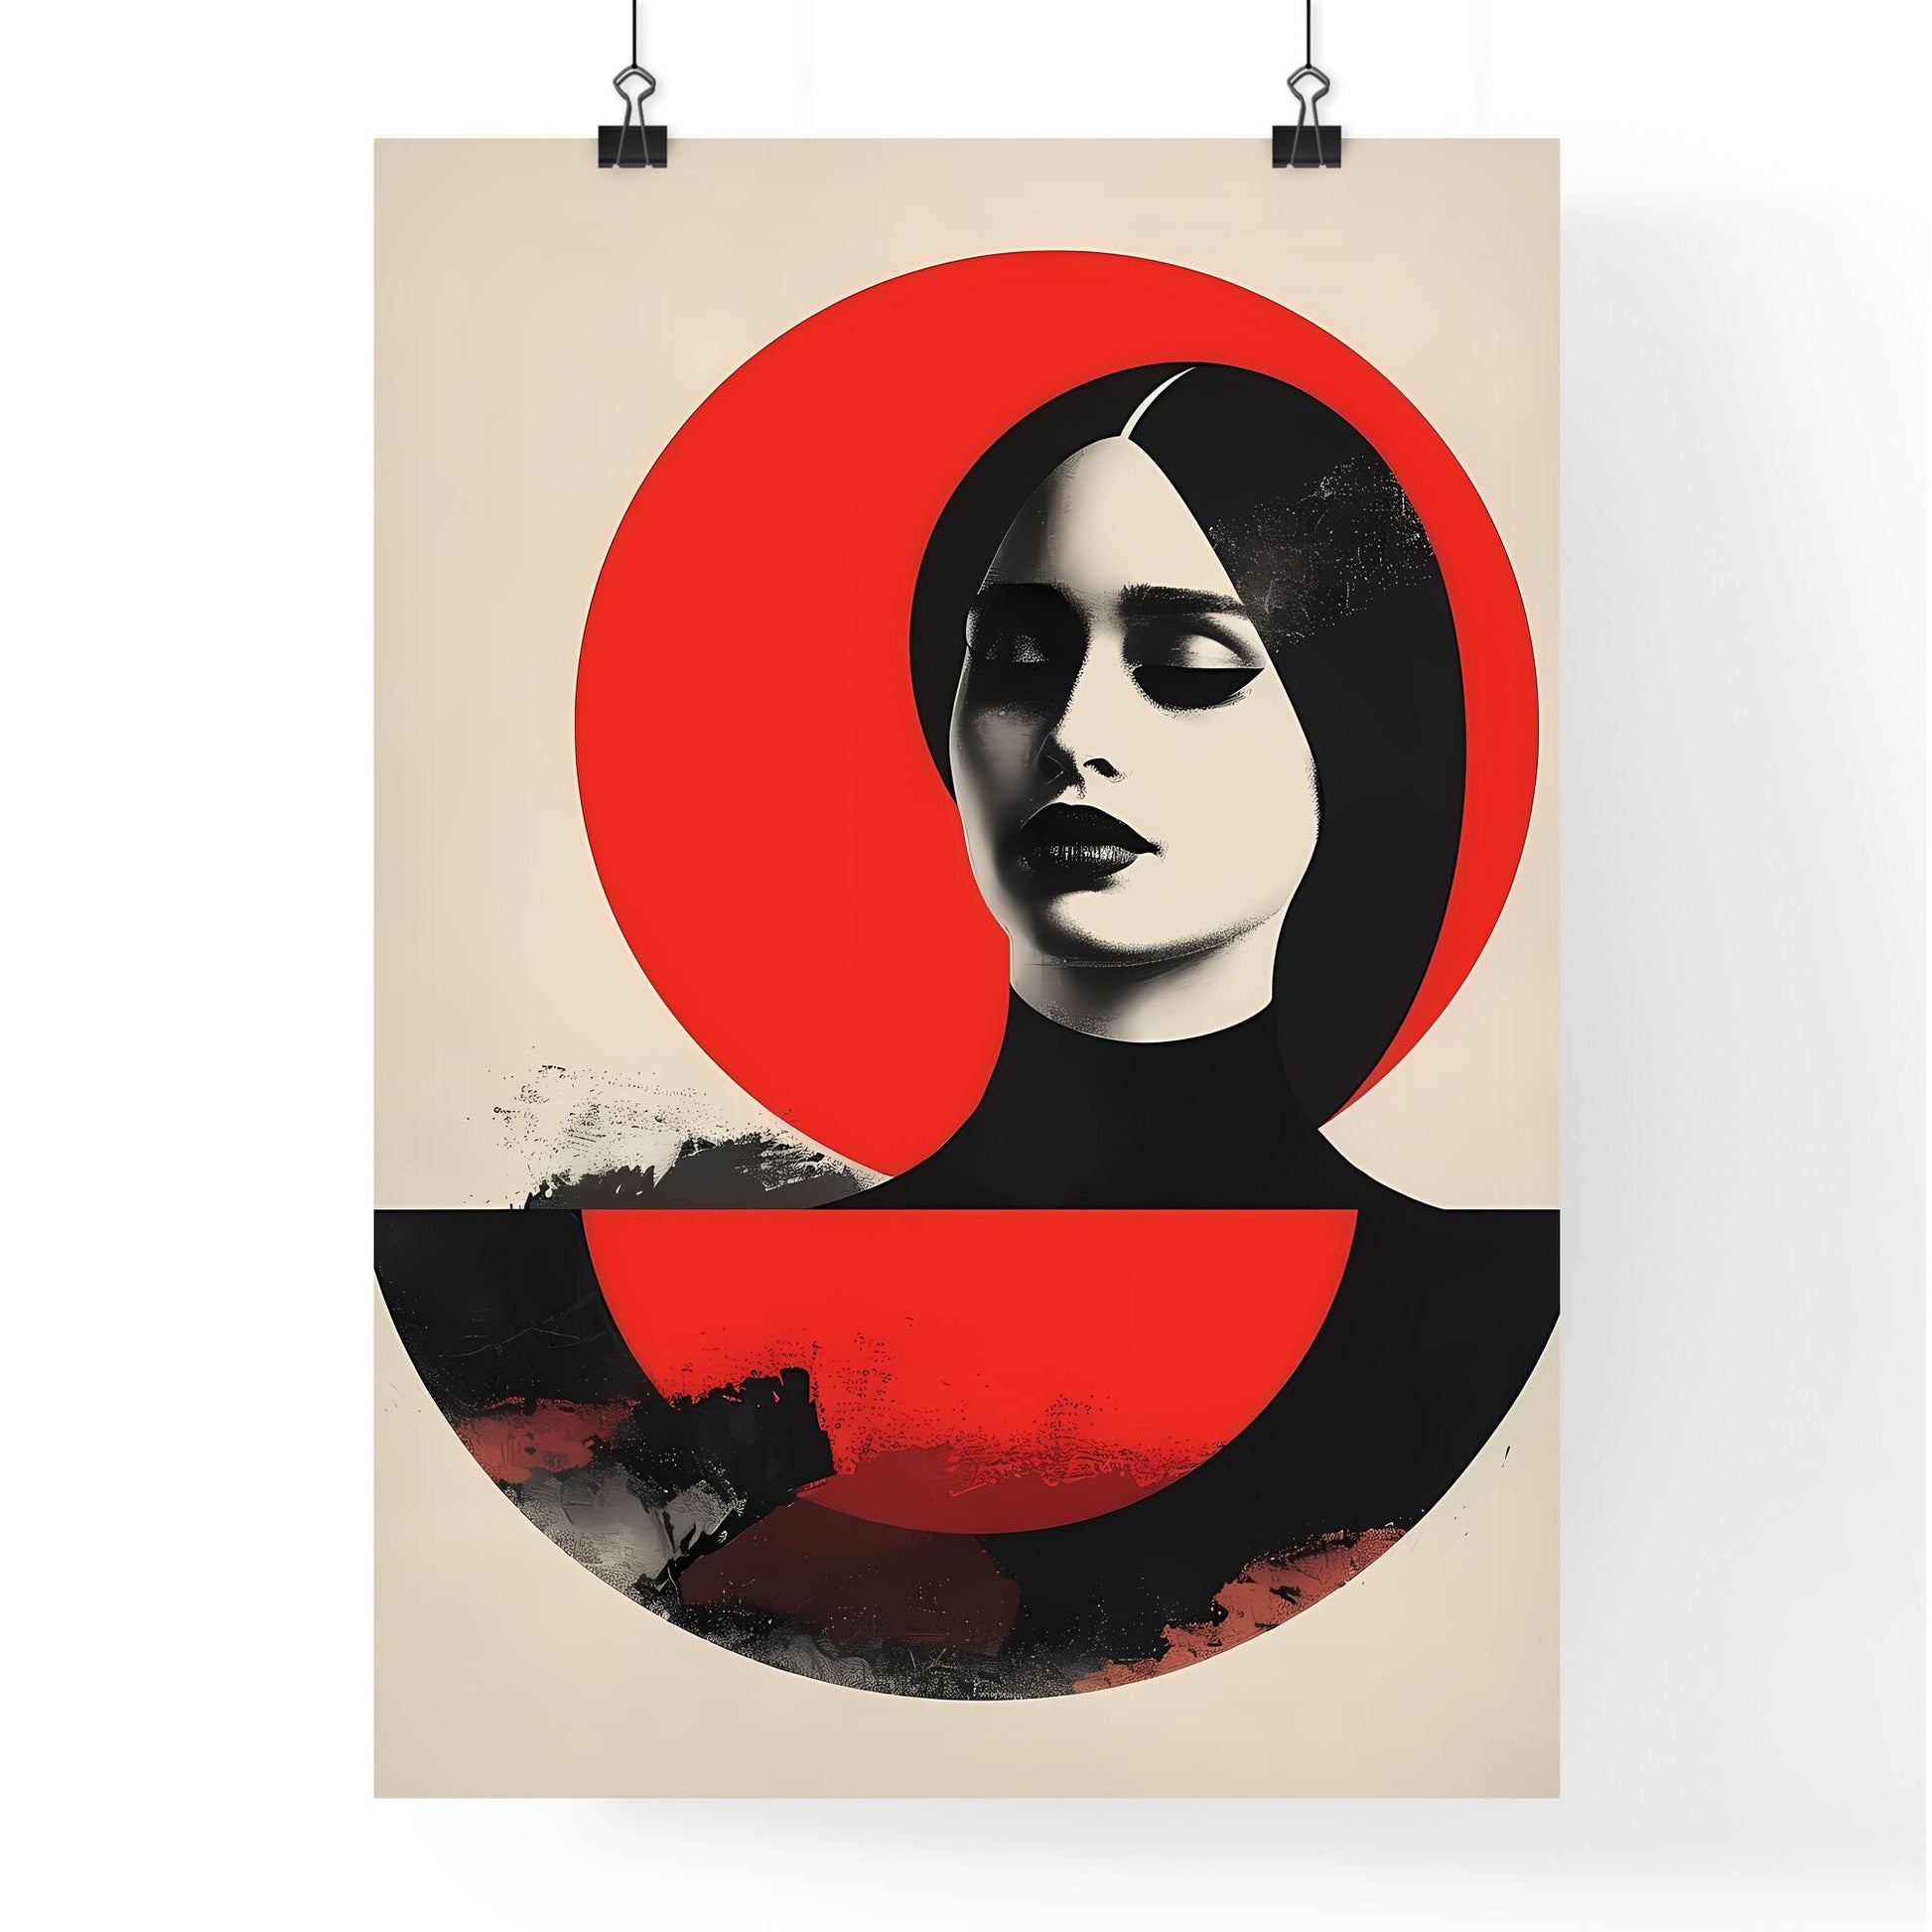 Geometric minimalist female logo, red and black, modern abstract pop art, woman with black hair and red circle Default Title